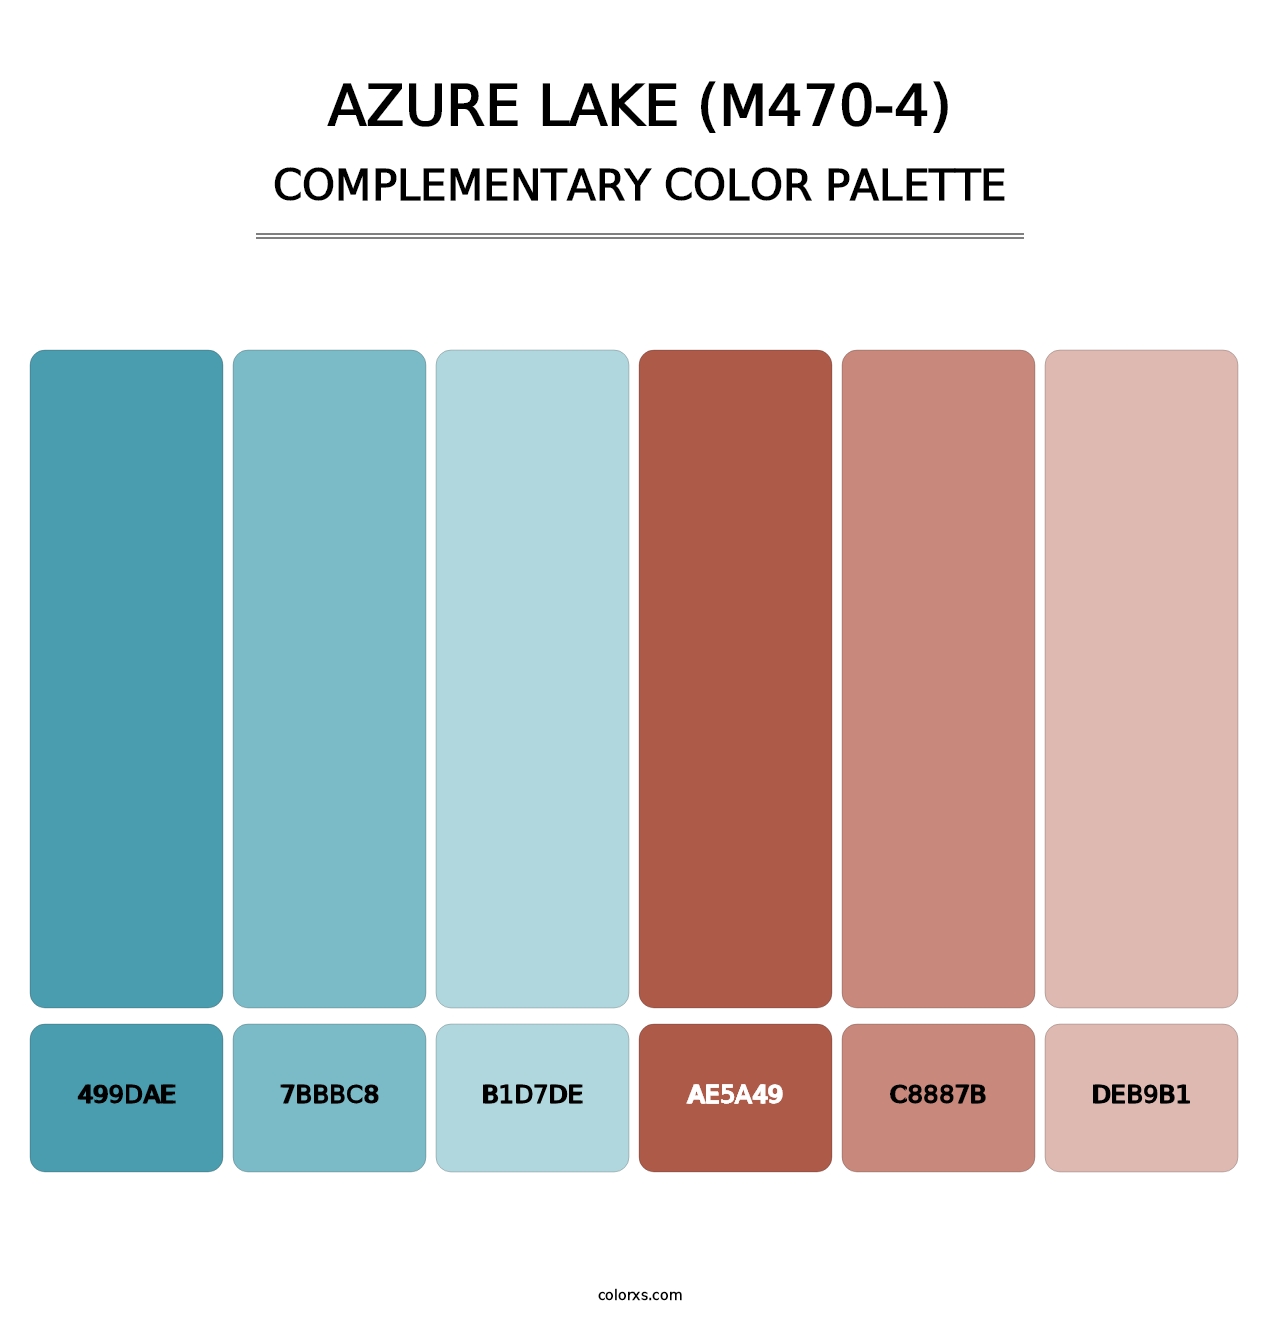 Azure Lake (M470-4) - Complementary Color Palette